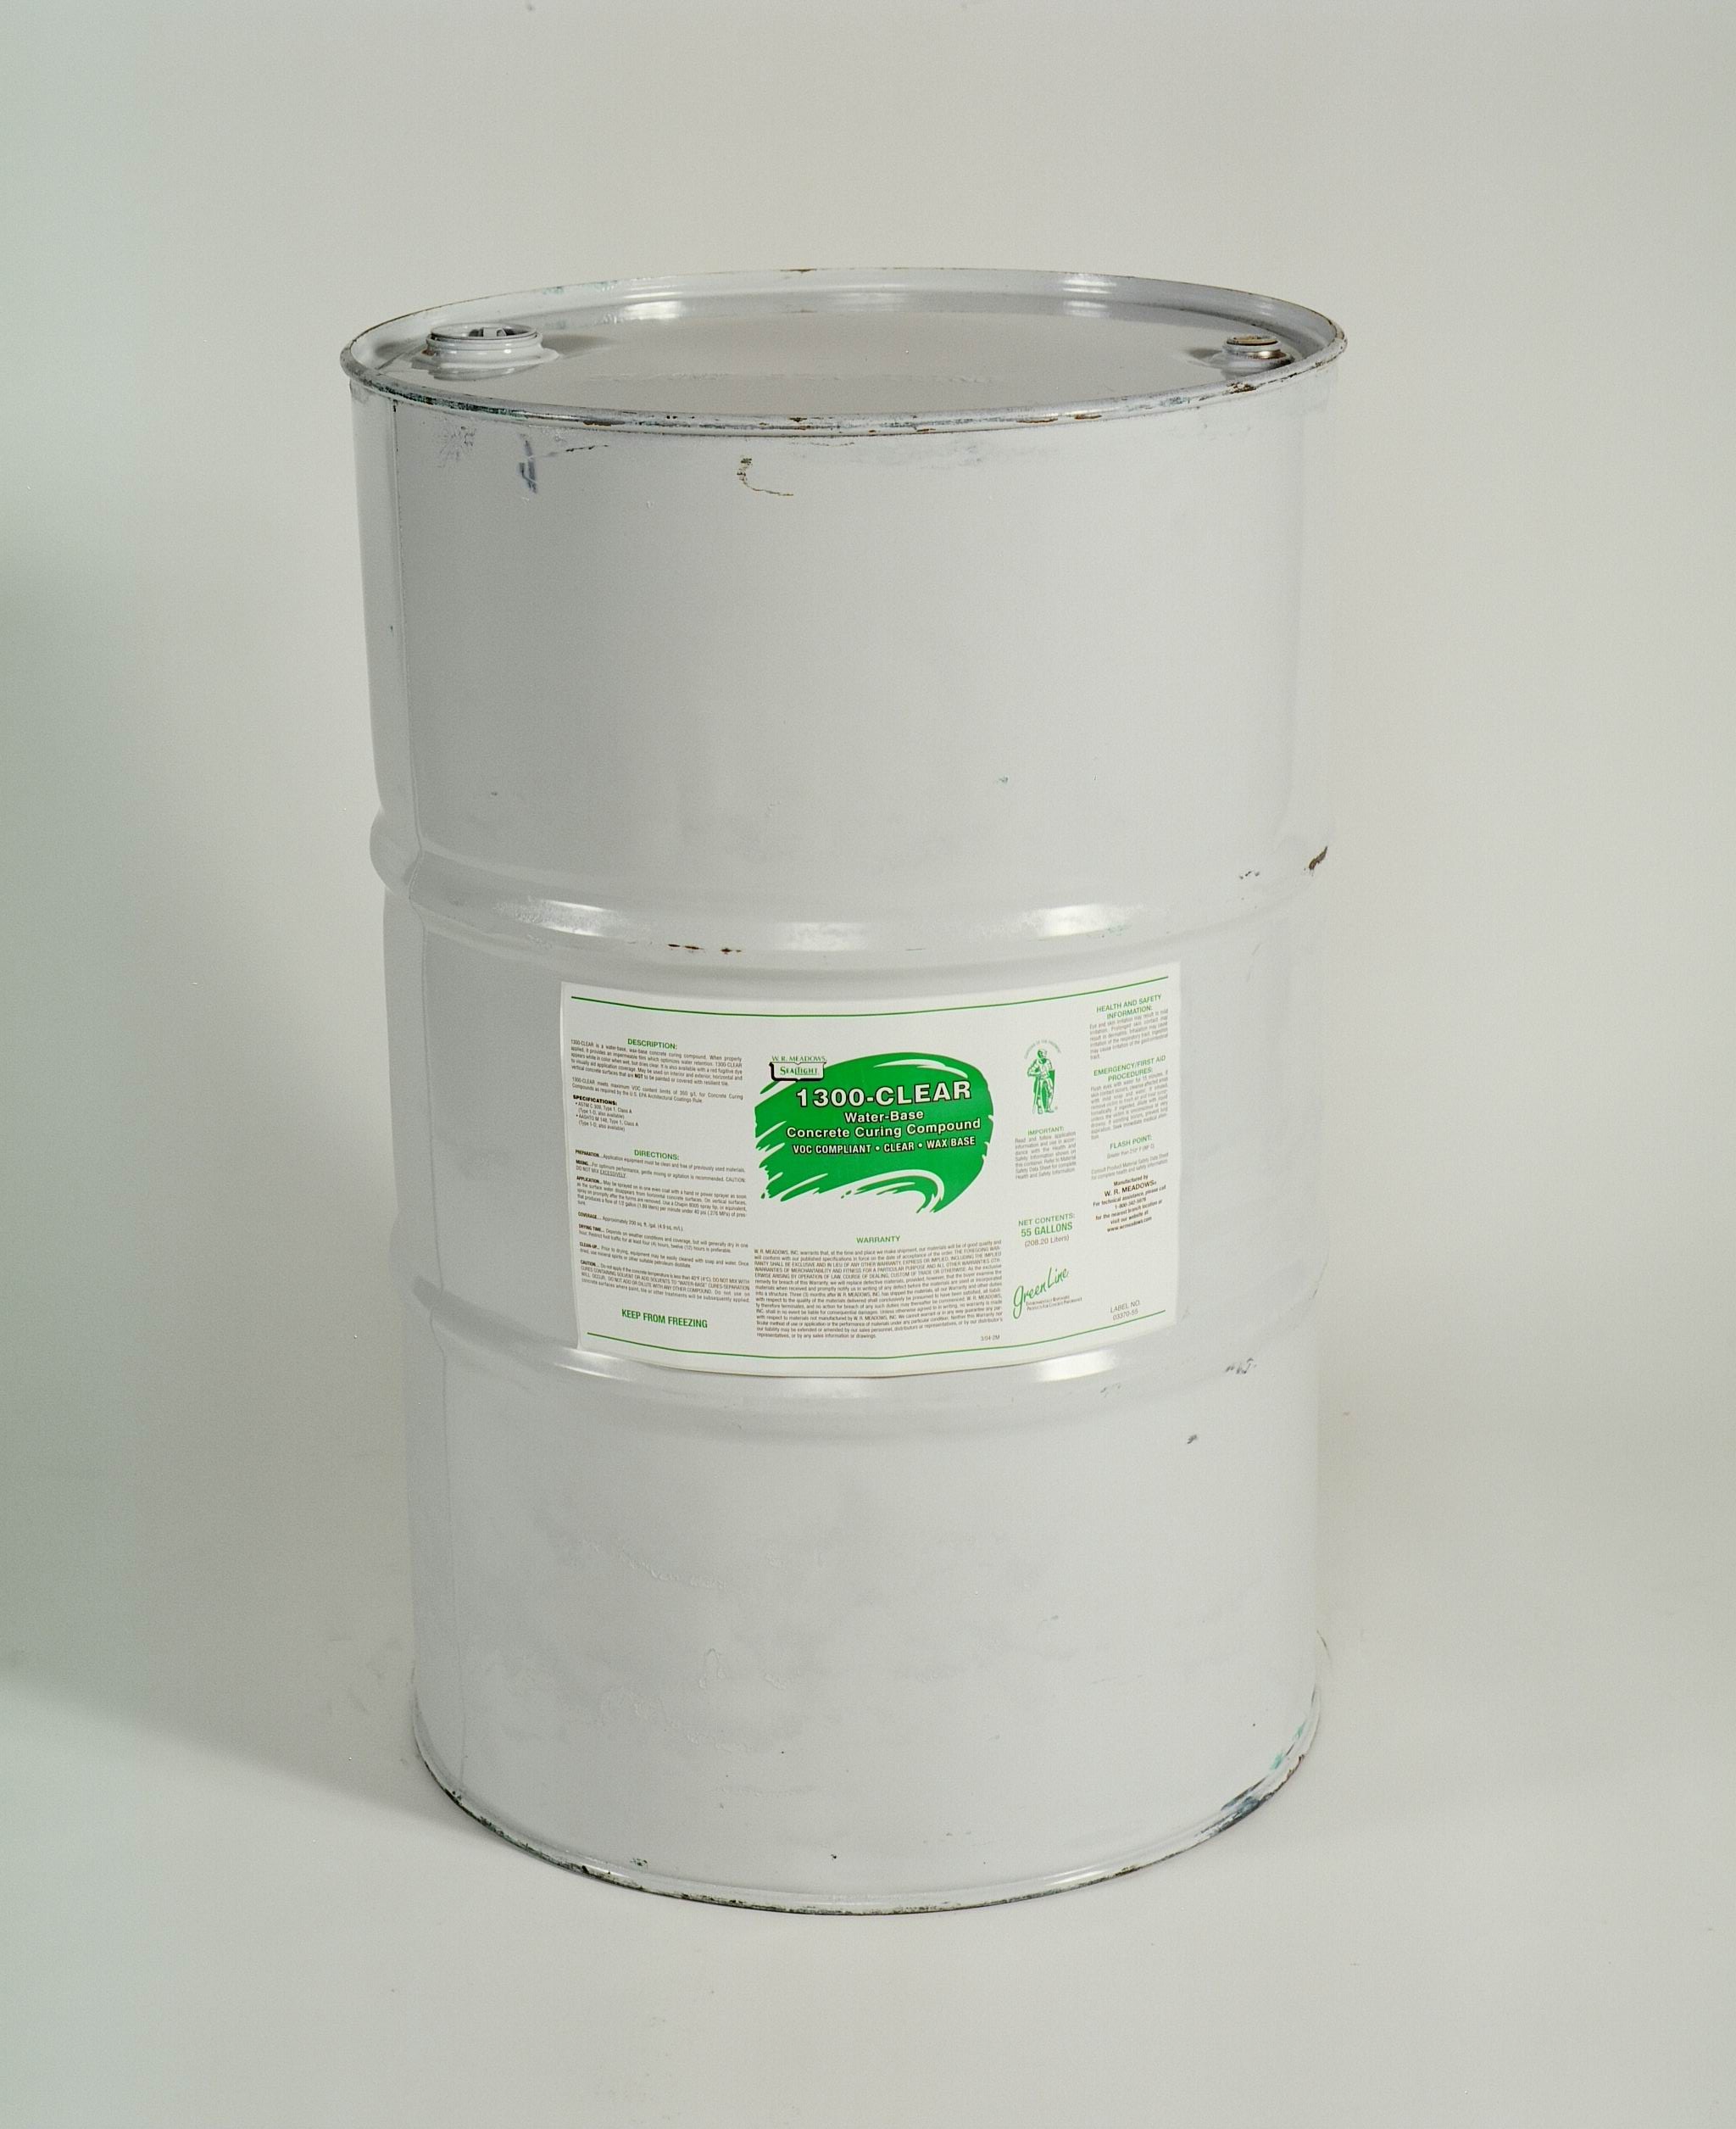 55 GALLON CLEAR WATER BASED WAX-BASED CONCRETE CURING COMPOUND